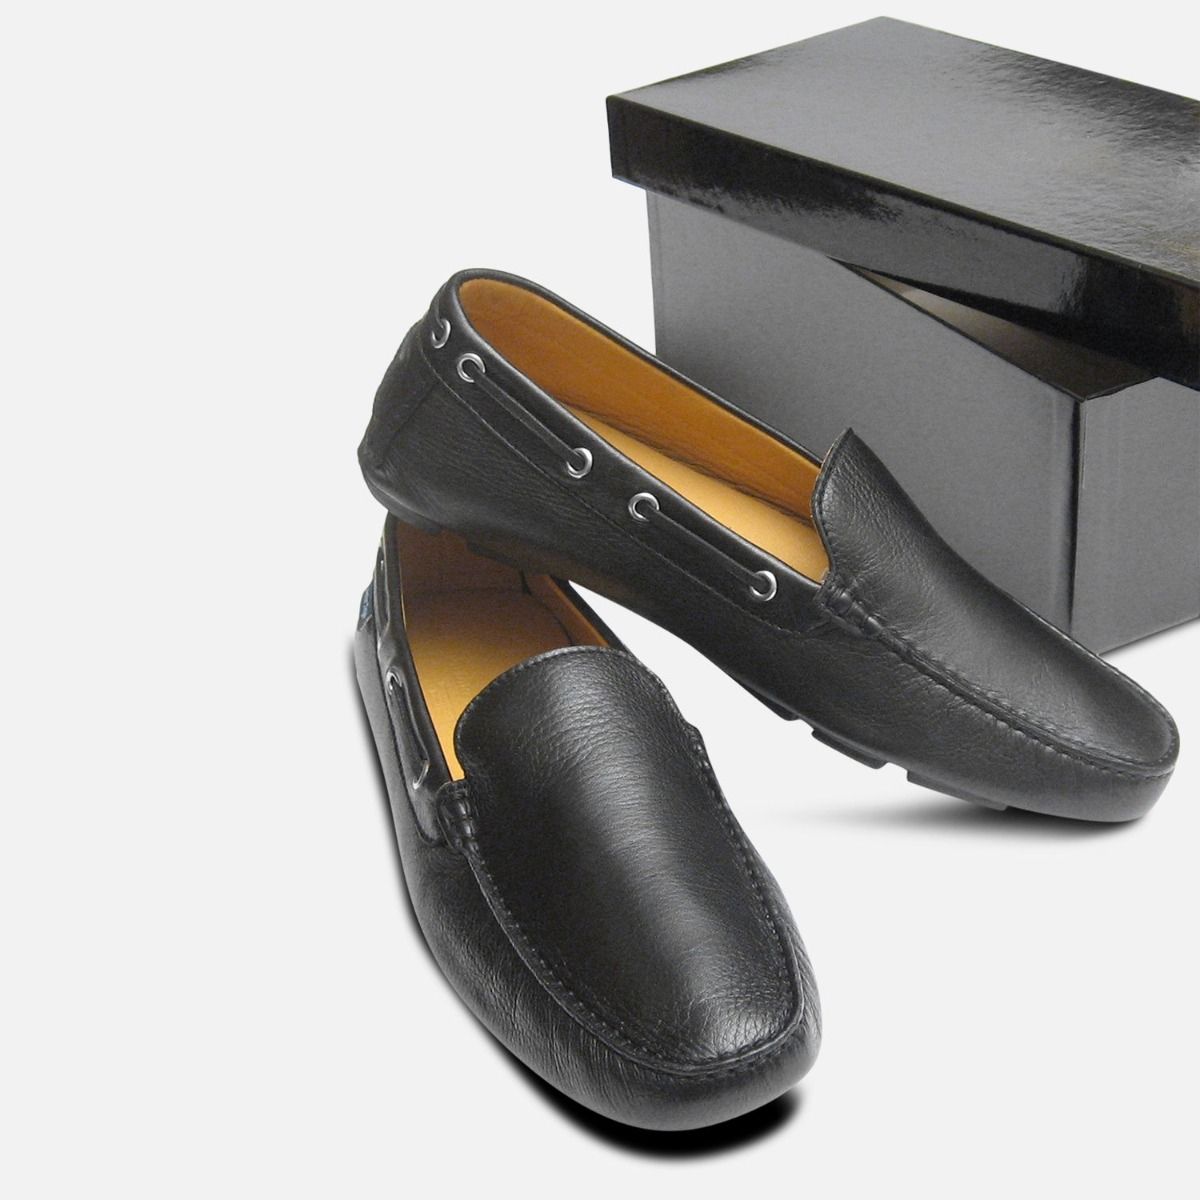 Black Leather Italian Driving Shoe Loafers For Men 3 